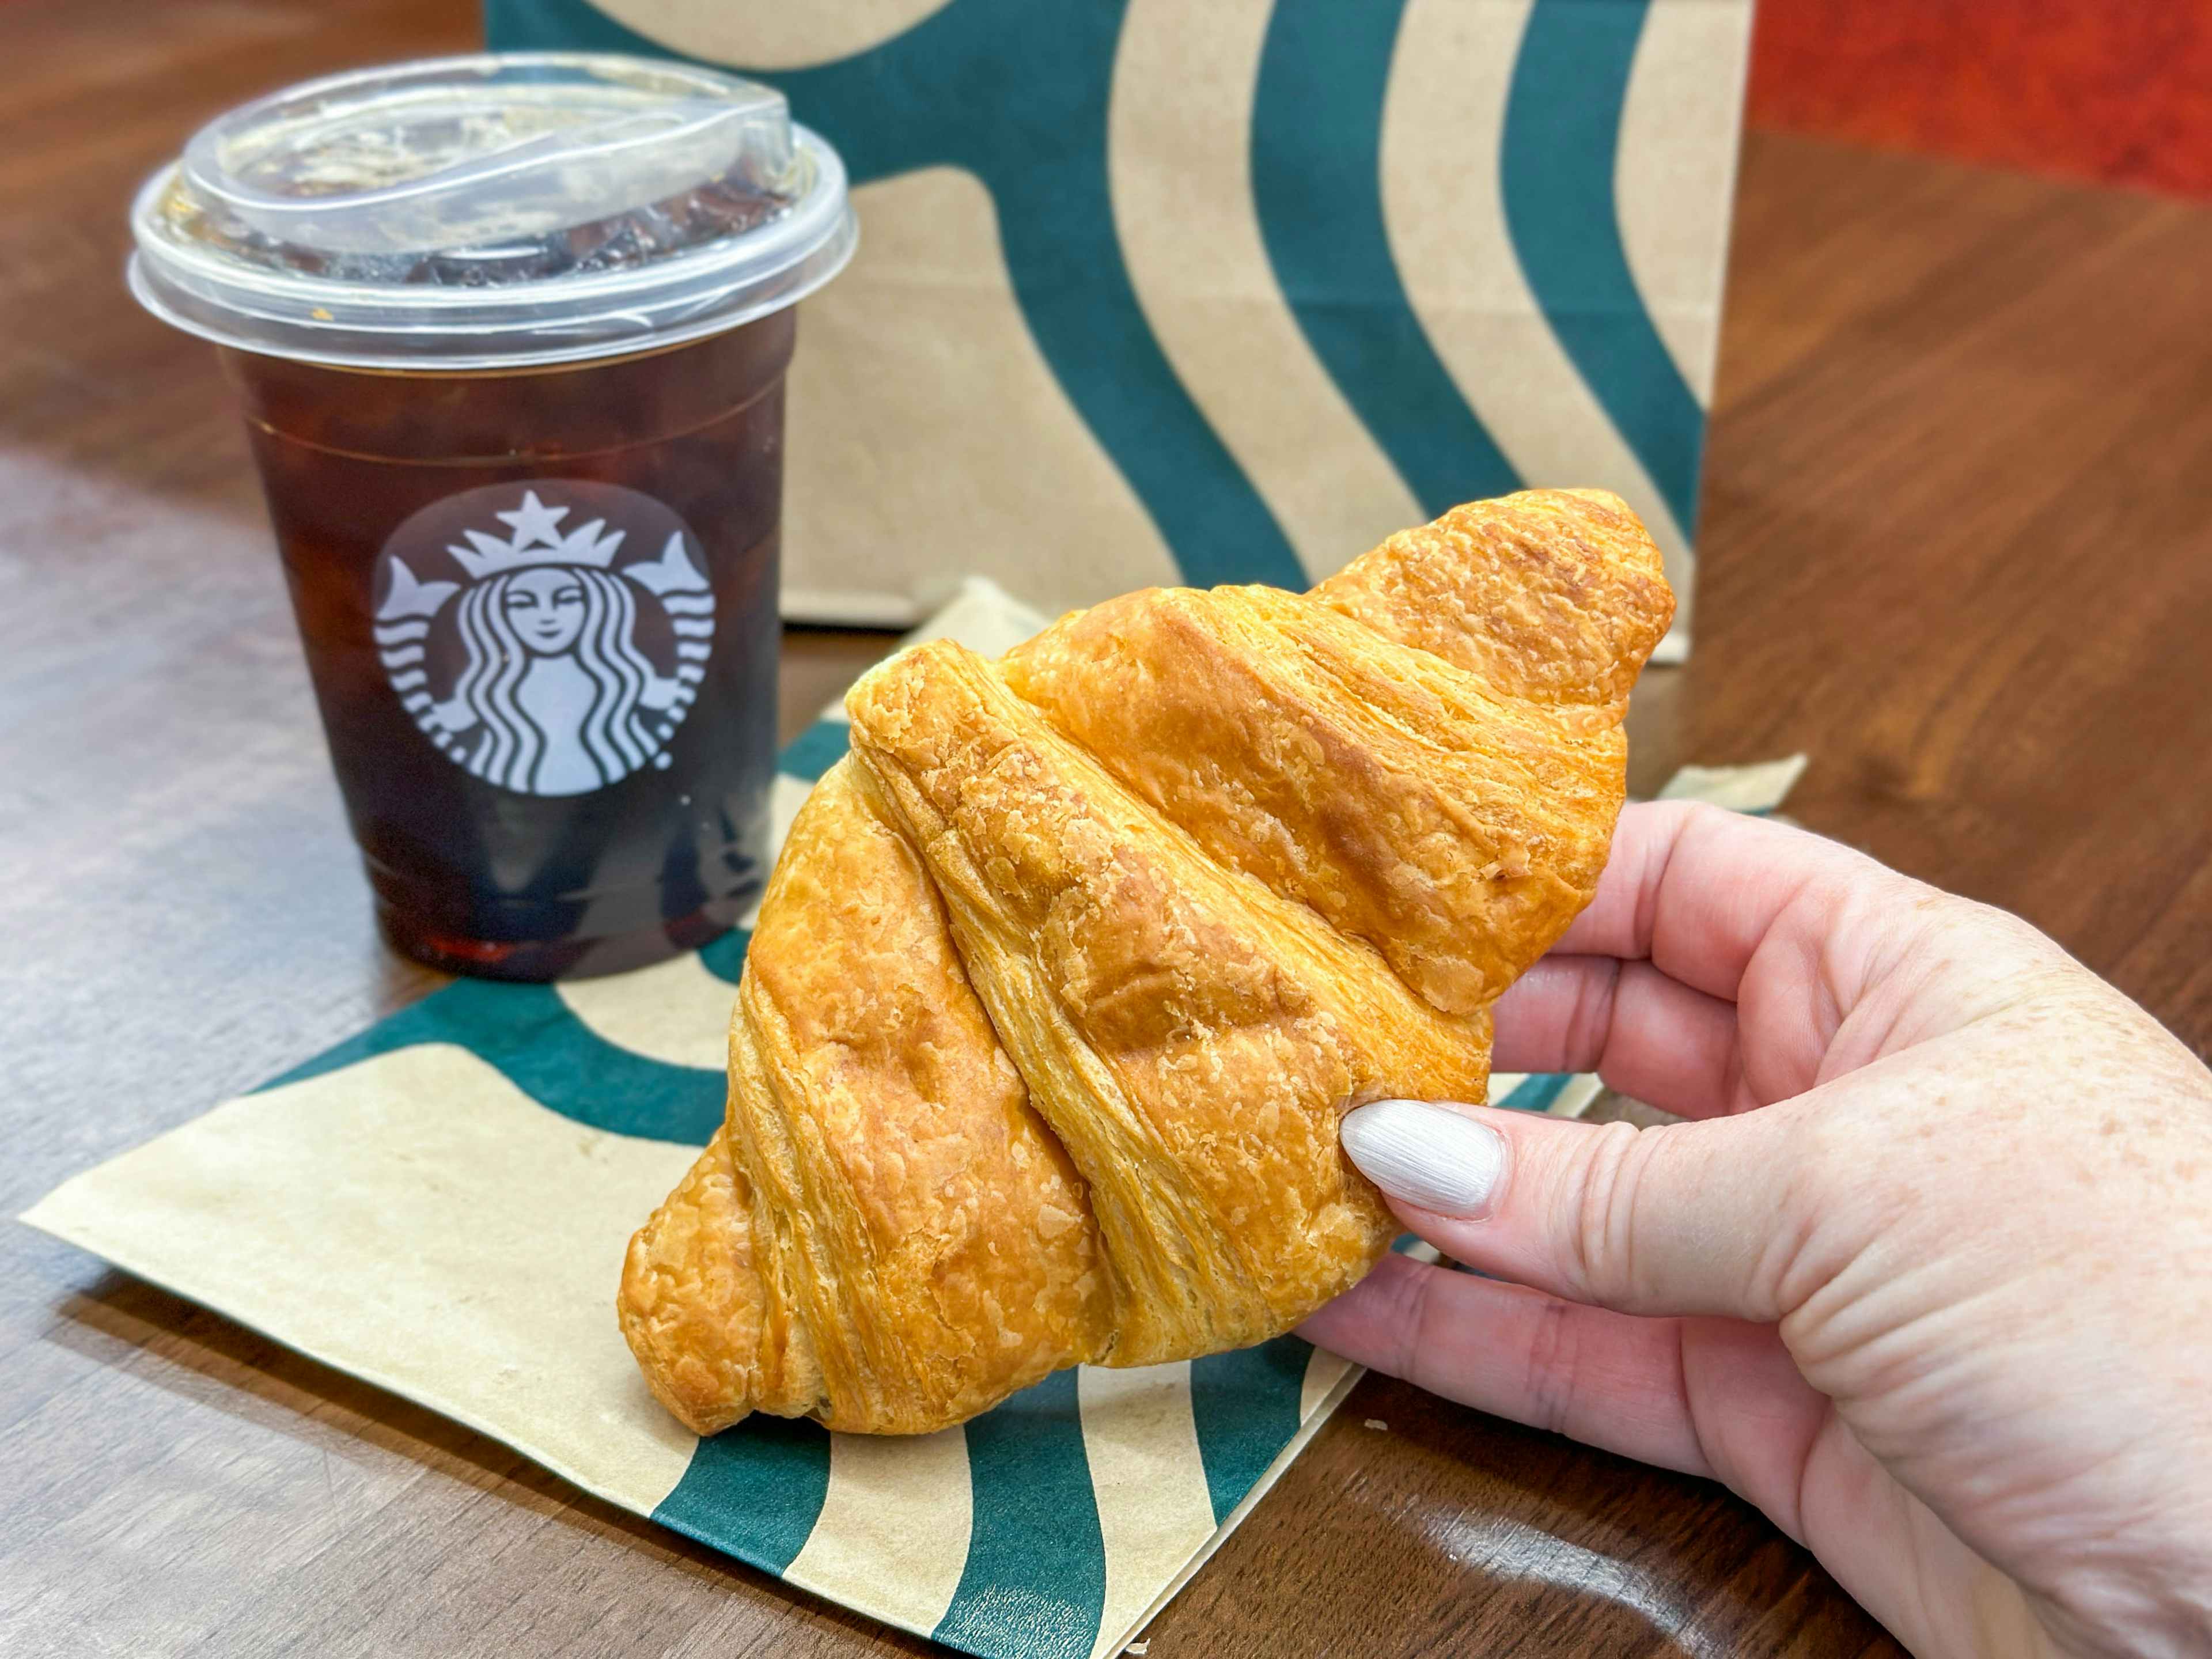 starbucks-pairing-croissant-iced-coffee-tall-kcl-6